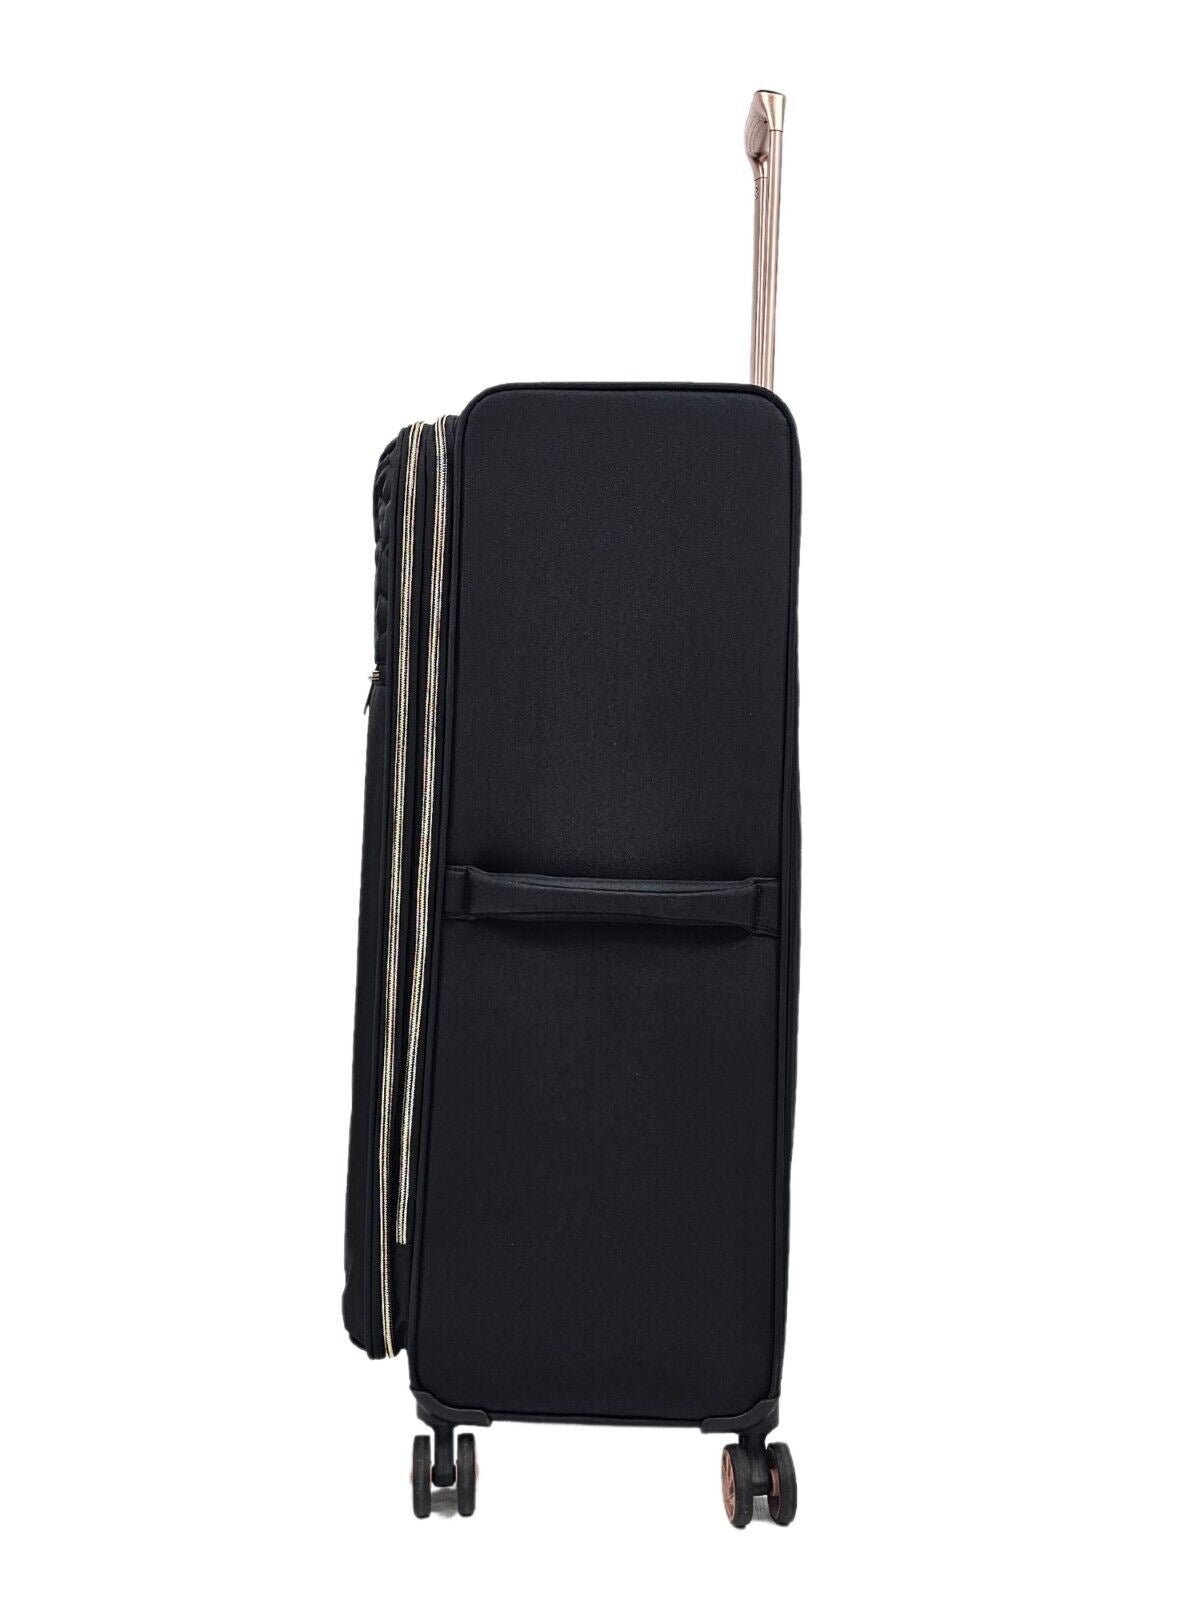 Birmingham Large Soft Shell Suitcase in Black